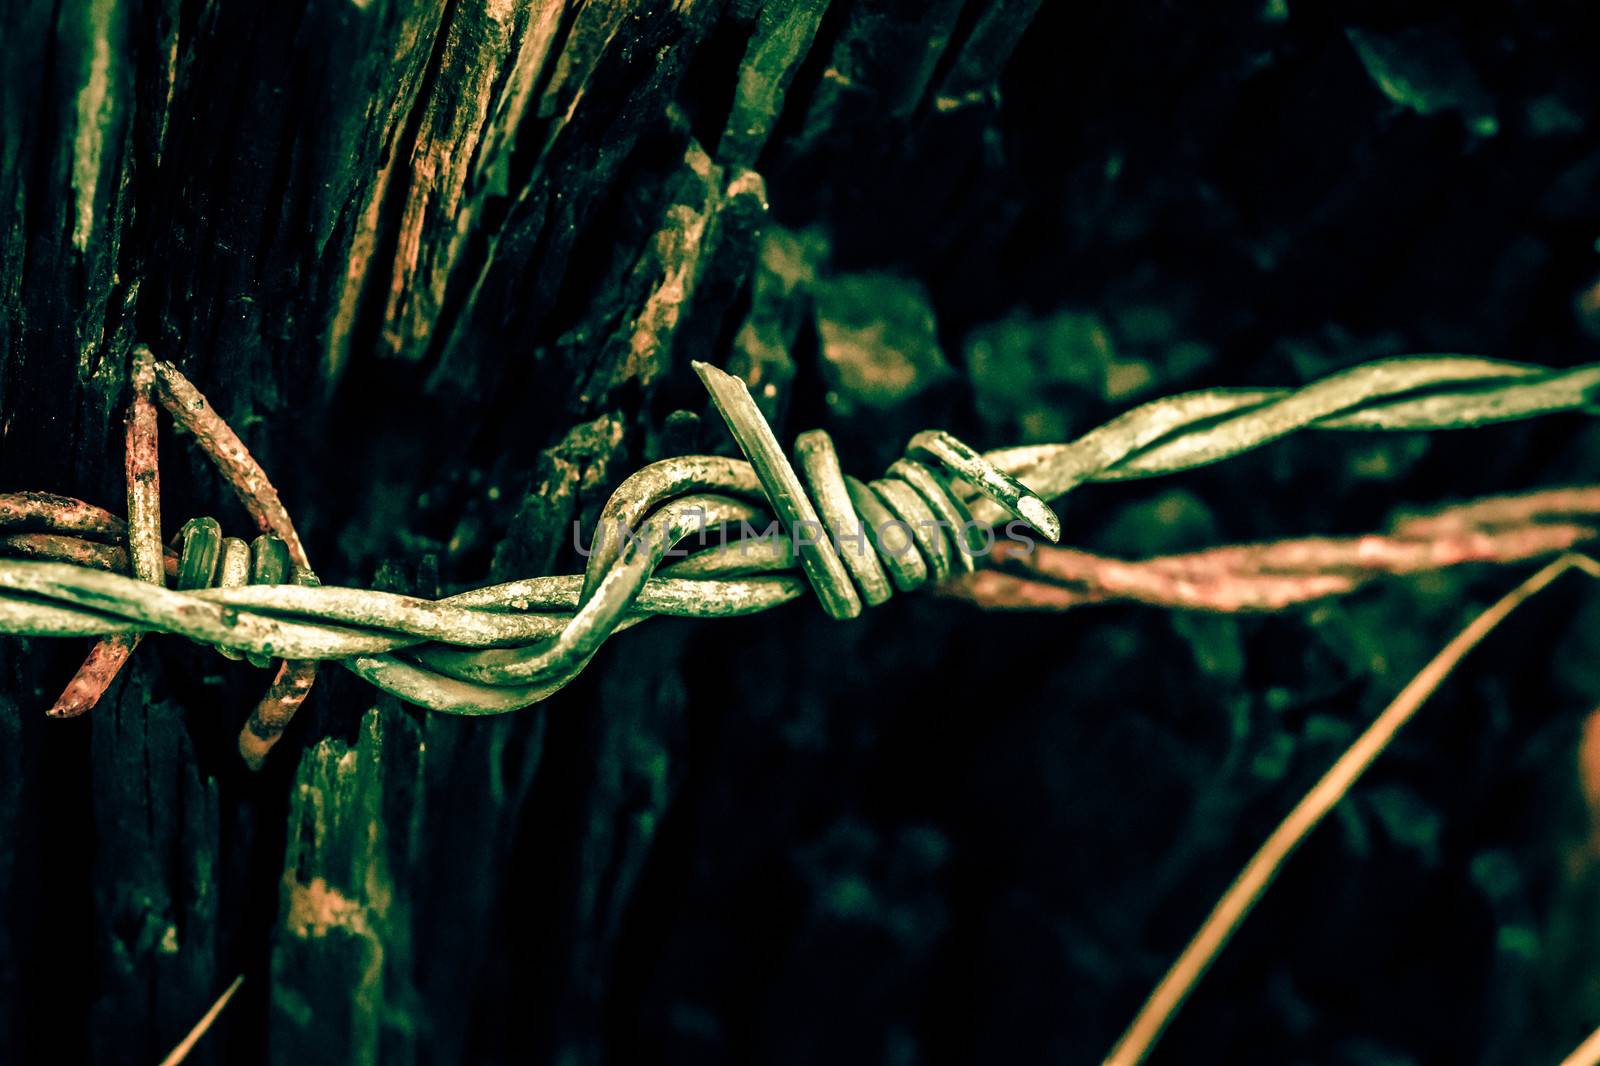 Barb wire by Sportactive